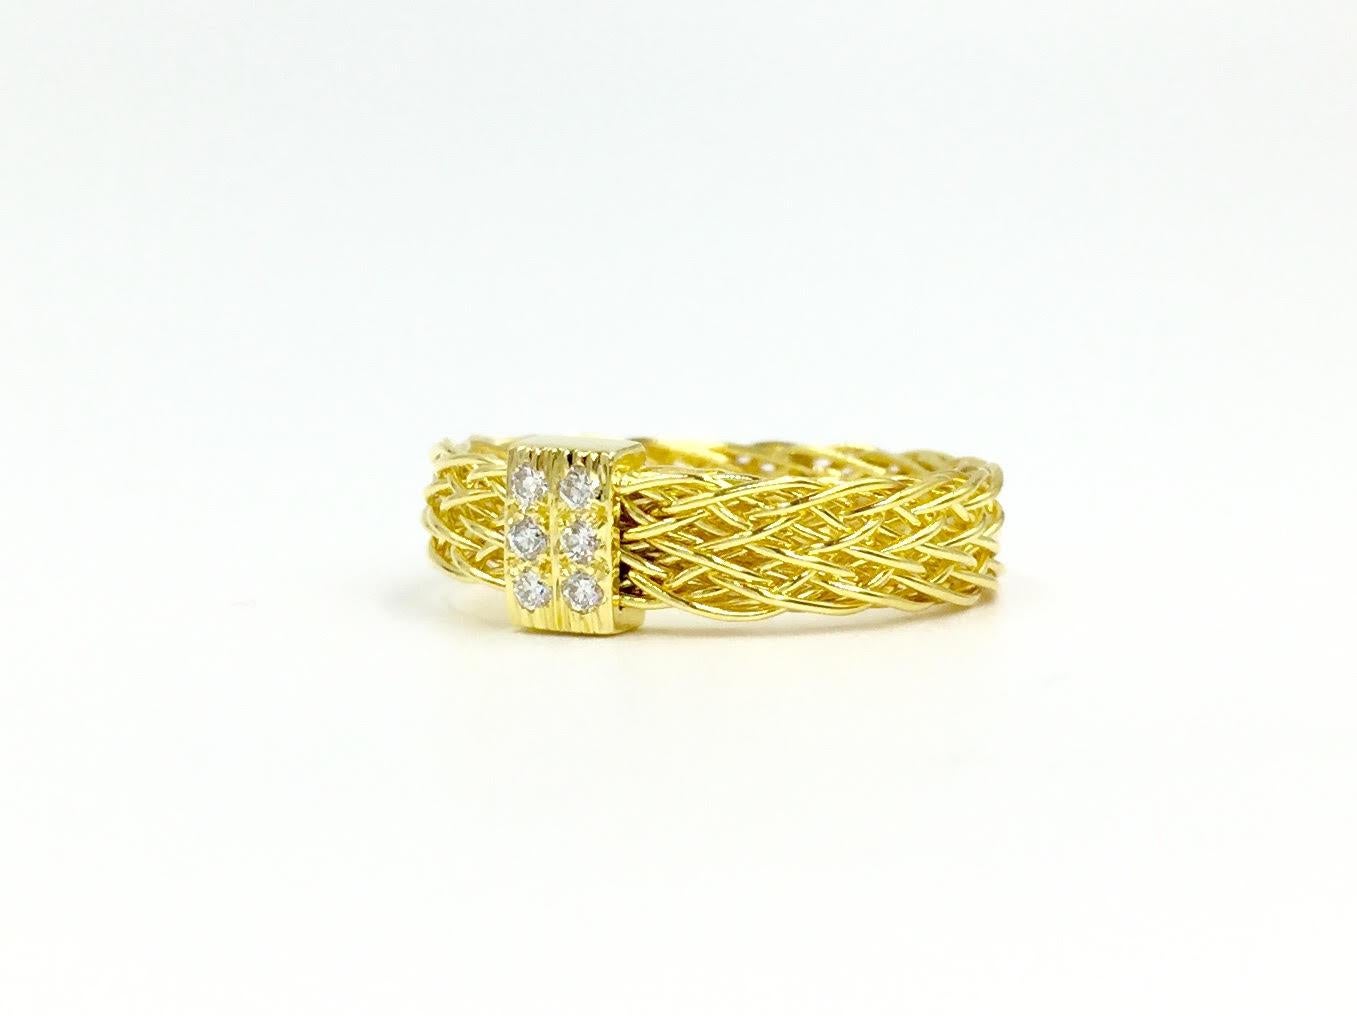 Signed Henry Dunay 18 karat yellow gold woven 4mm band style ring with 6 round diamonds at .10 carats total weight. This stylish ring is wide enough that it can be worn alone or can stack beautifully with other thin rings. 
Finger size 6